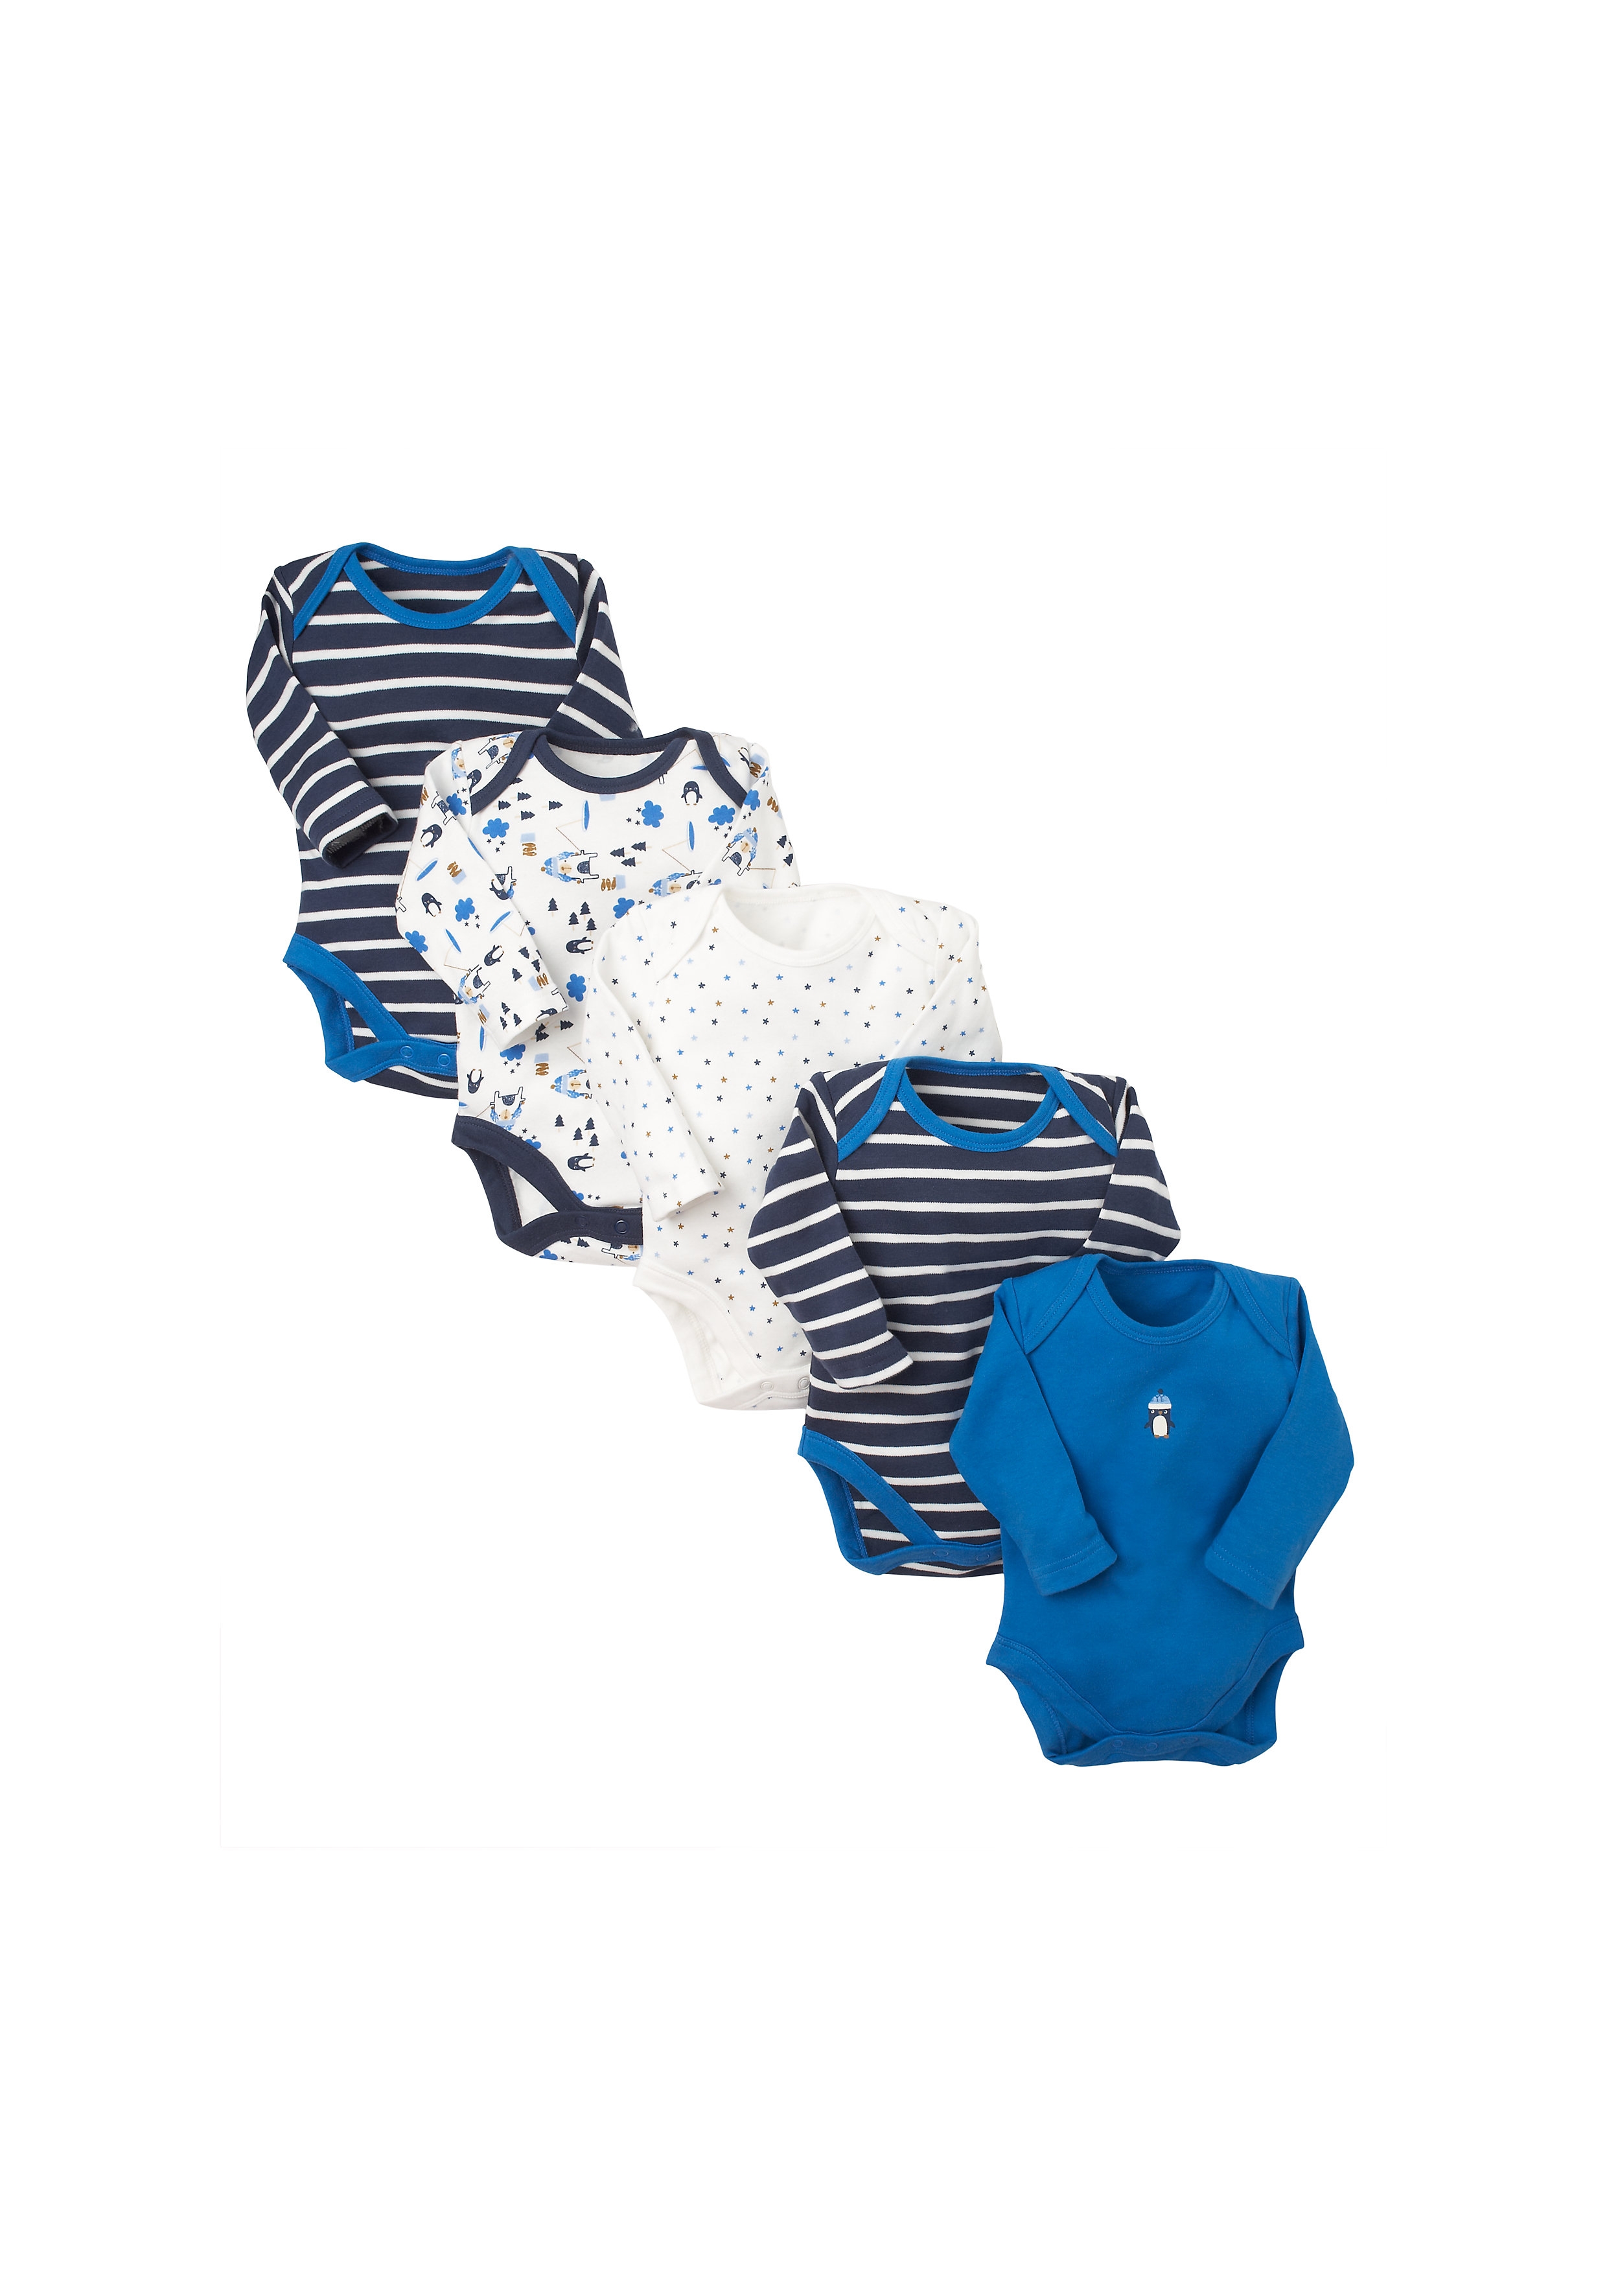 Boys Full Sleeves Bodysuit Striped And Printed - Pack Of 5 - Multicolor